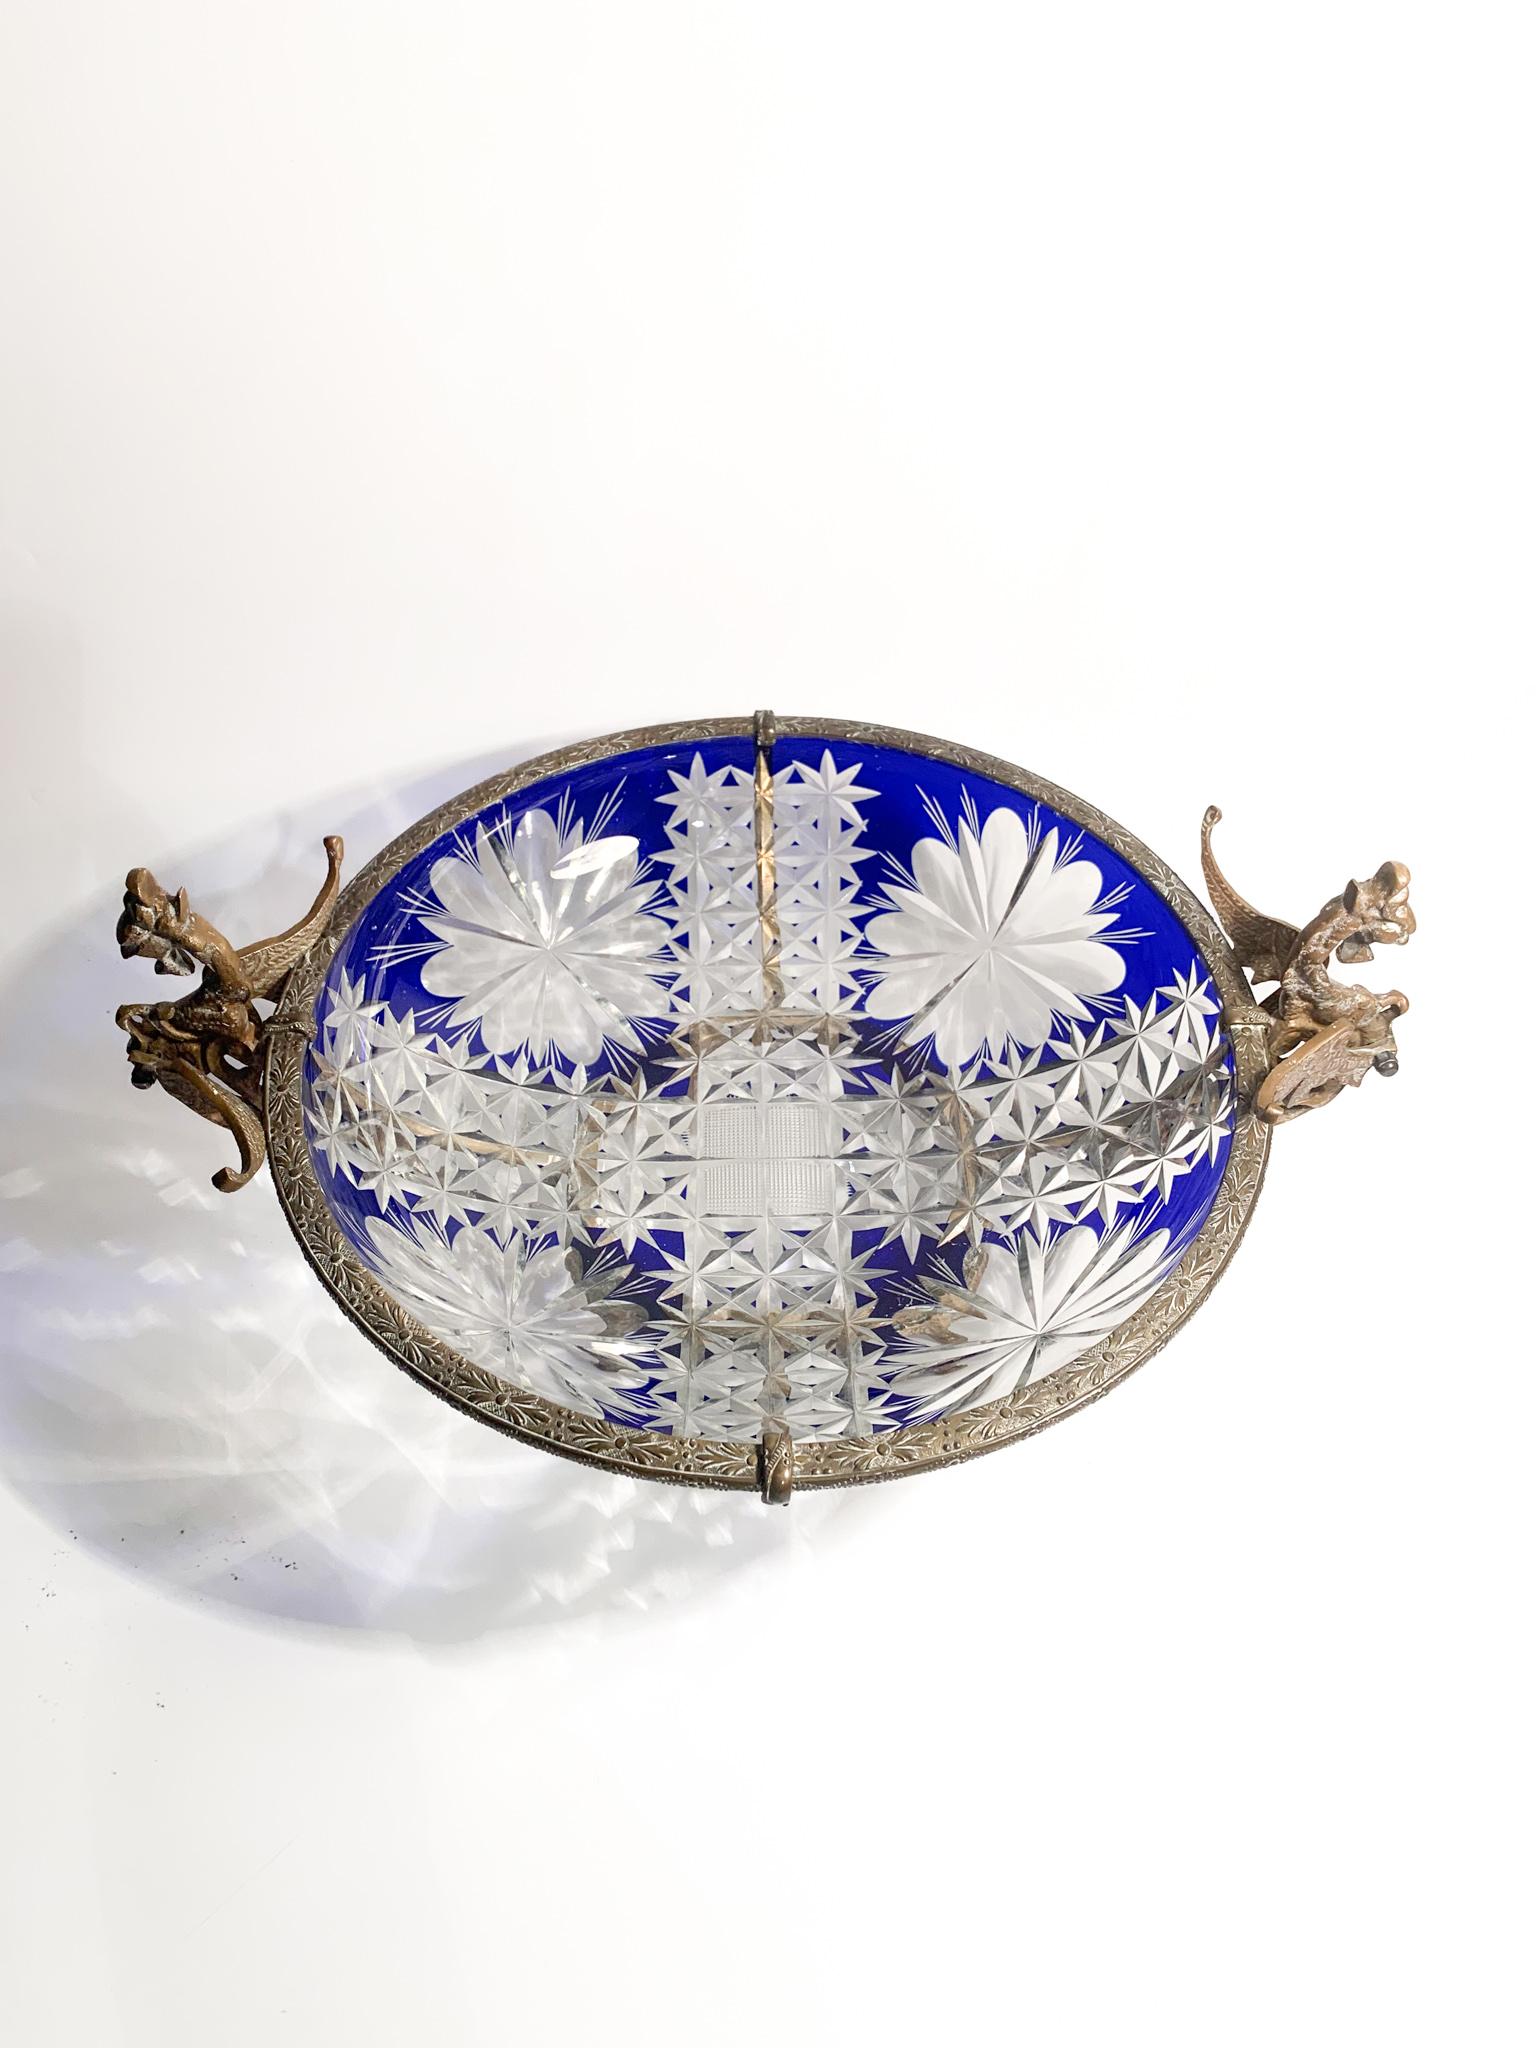 Centerpiece in transparent and blue Bohemian crystal and worked bronze, made in the early 20th century

Ø 39 cm Ø 30 cm h 18 cm

The Bohemian crystal is a decorative glass produced since the 18th century in Bohemia. This land is famous for the